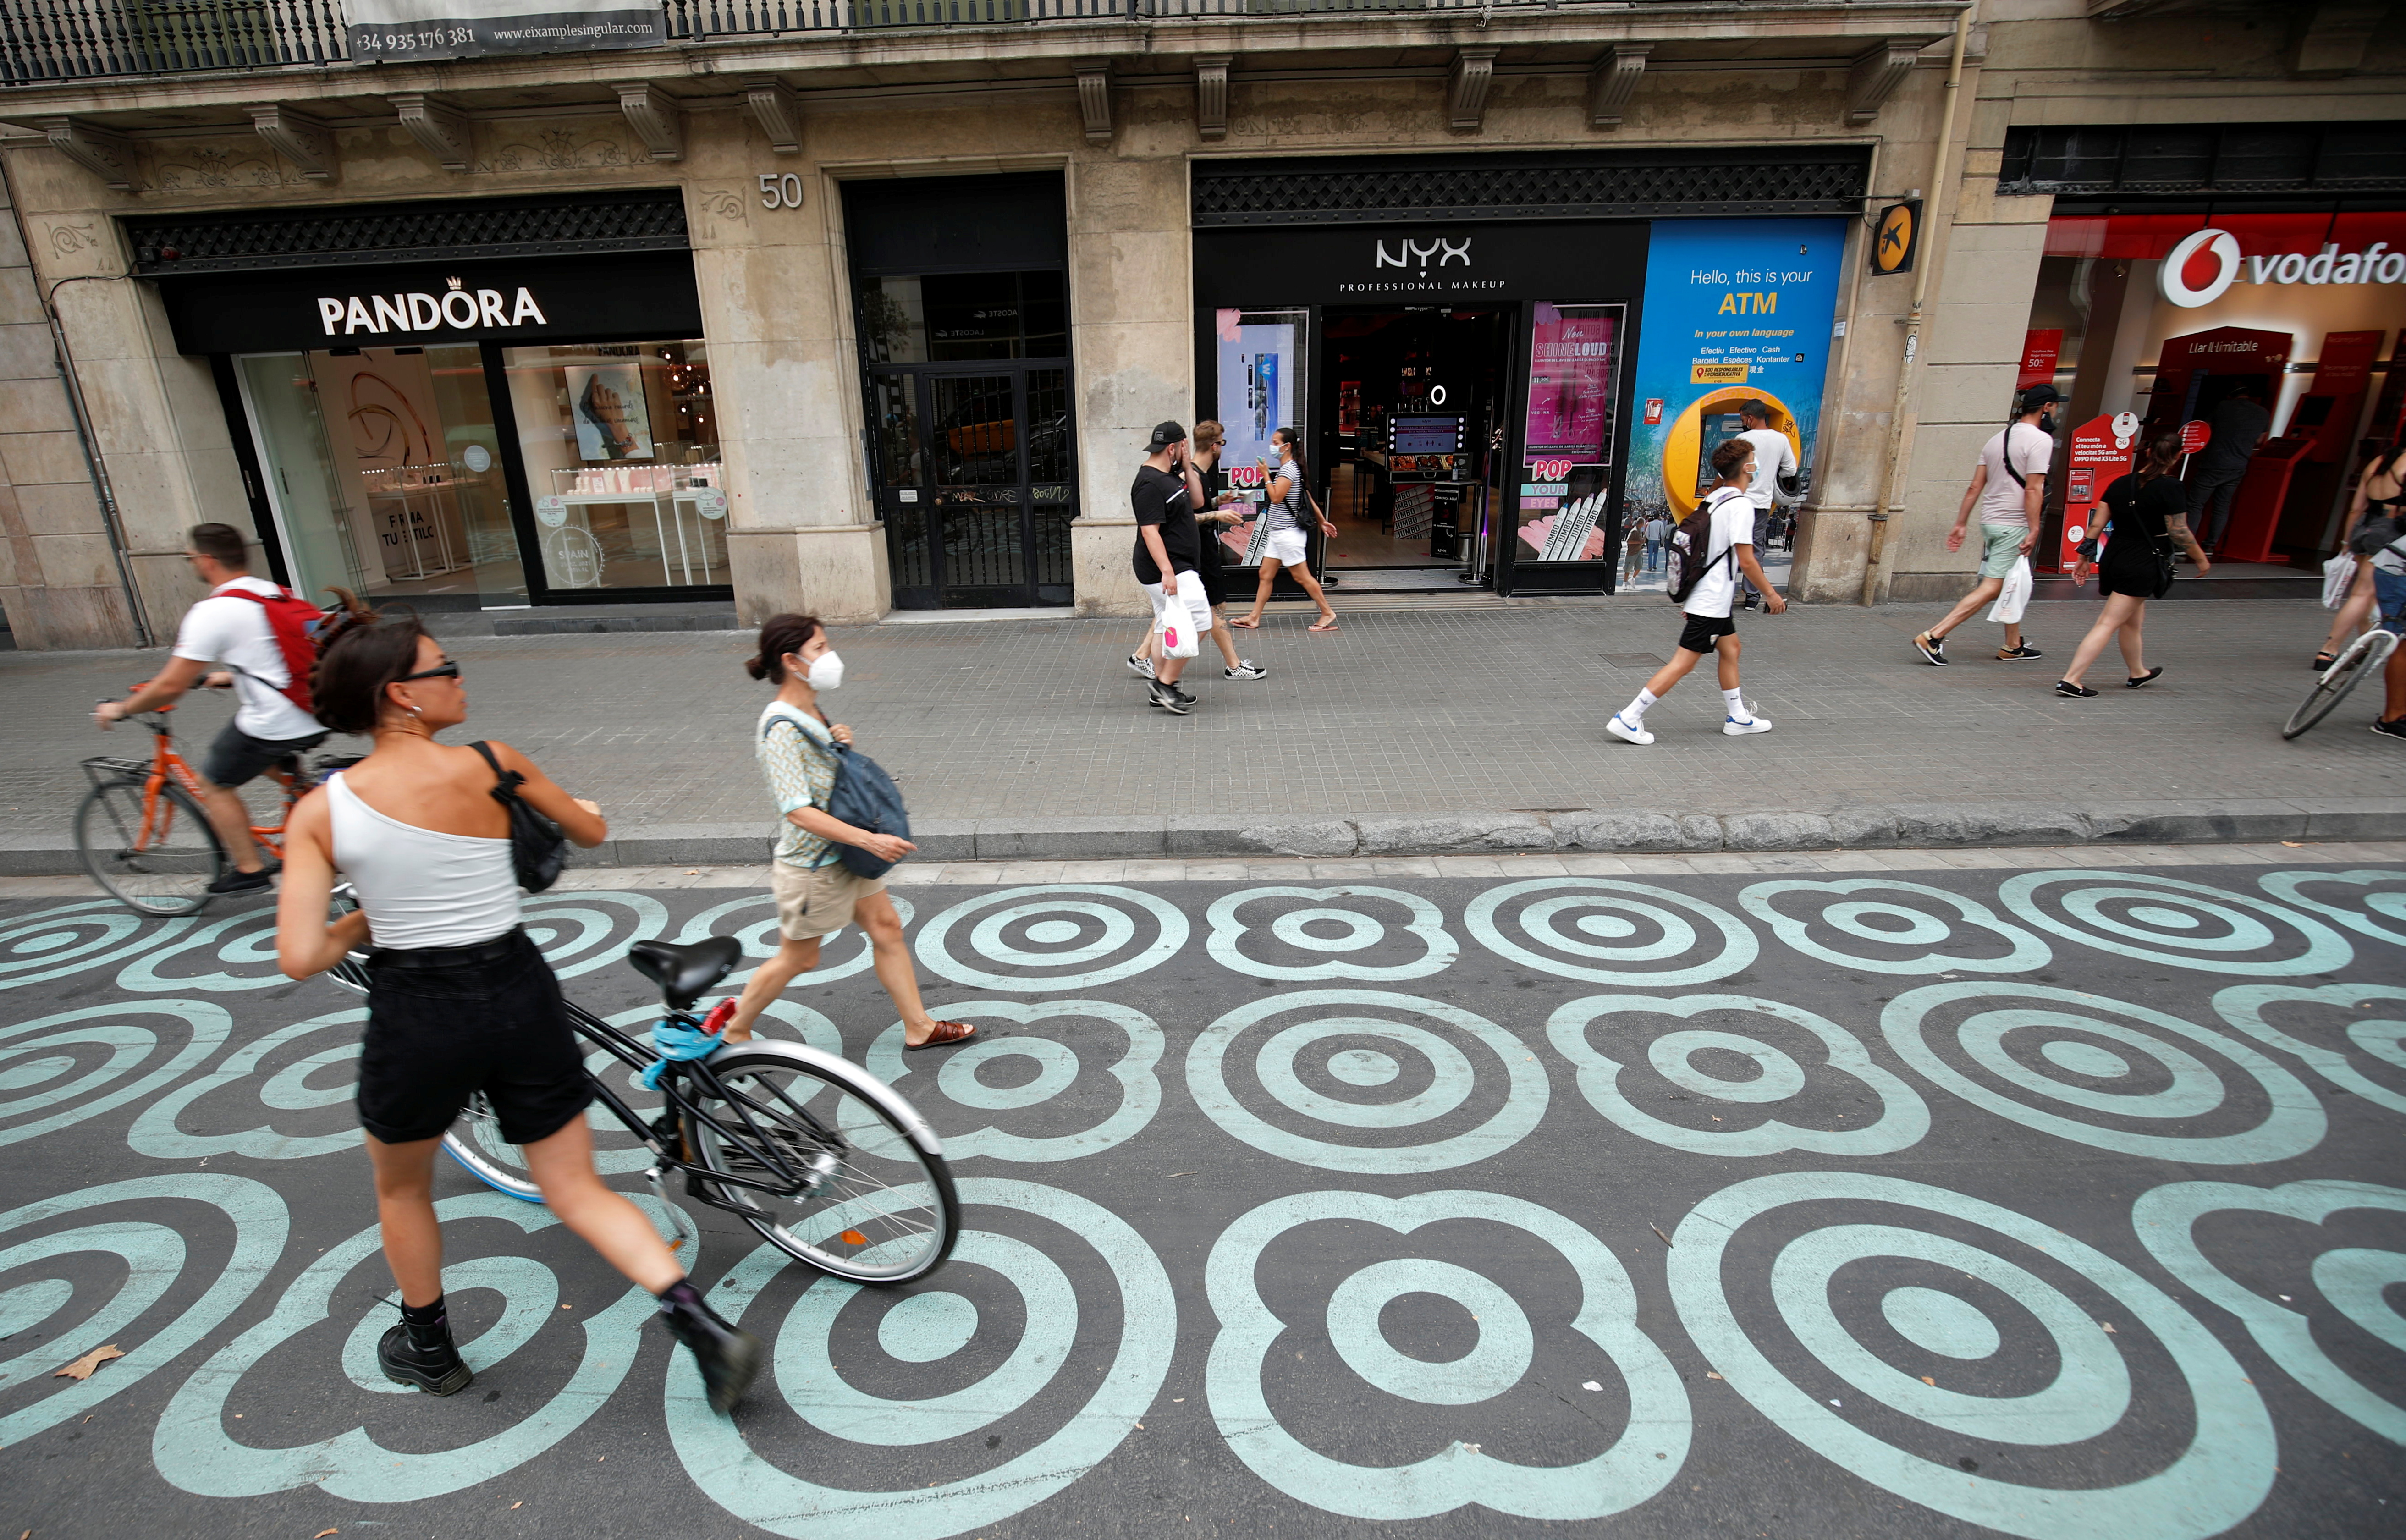 People walk by a pedestrian zone painted in blue at Pelai street in Barcelona